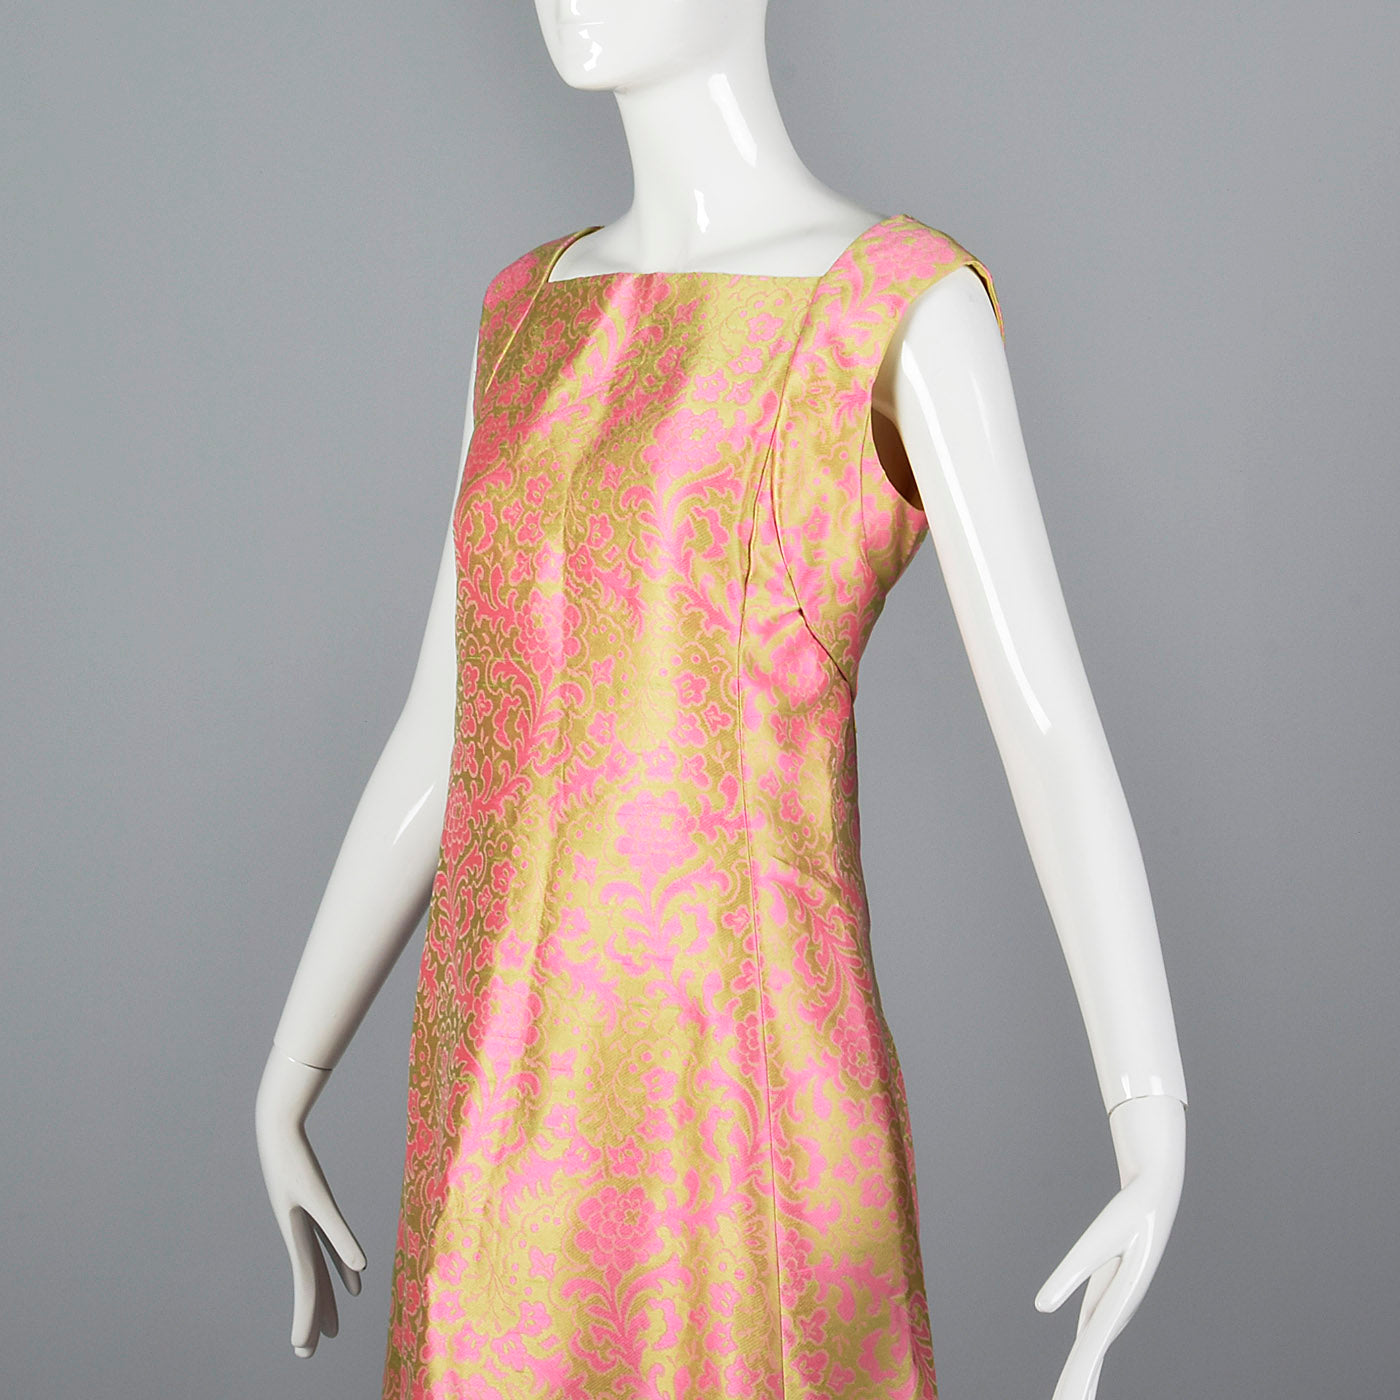 1960s Malcolm Starr Sleeveless Maxi Dress in Pink and Chartreuse Psychedelic Brocade